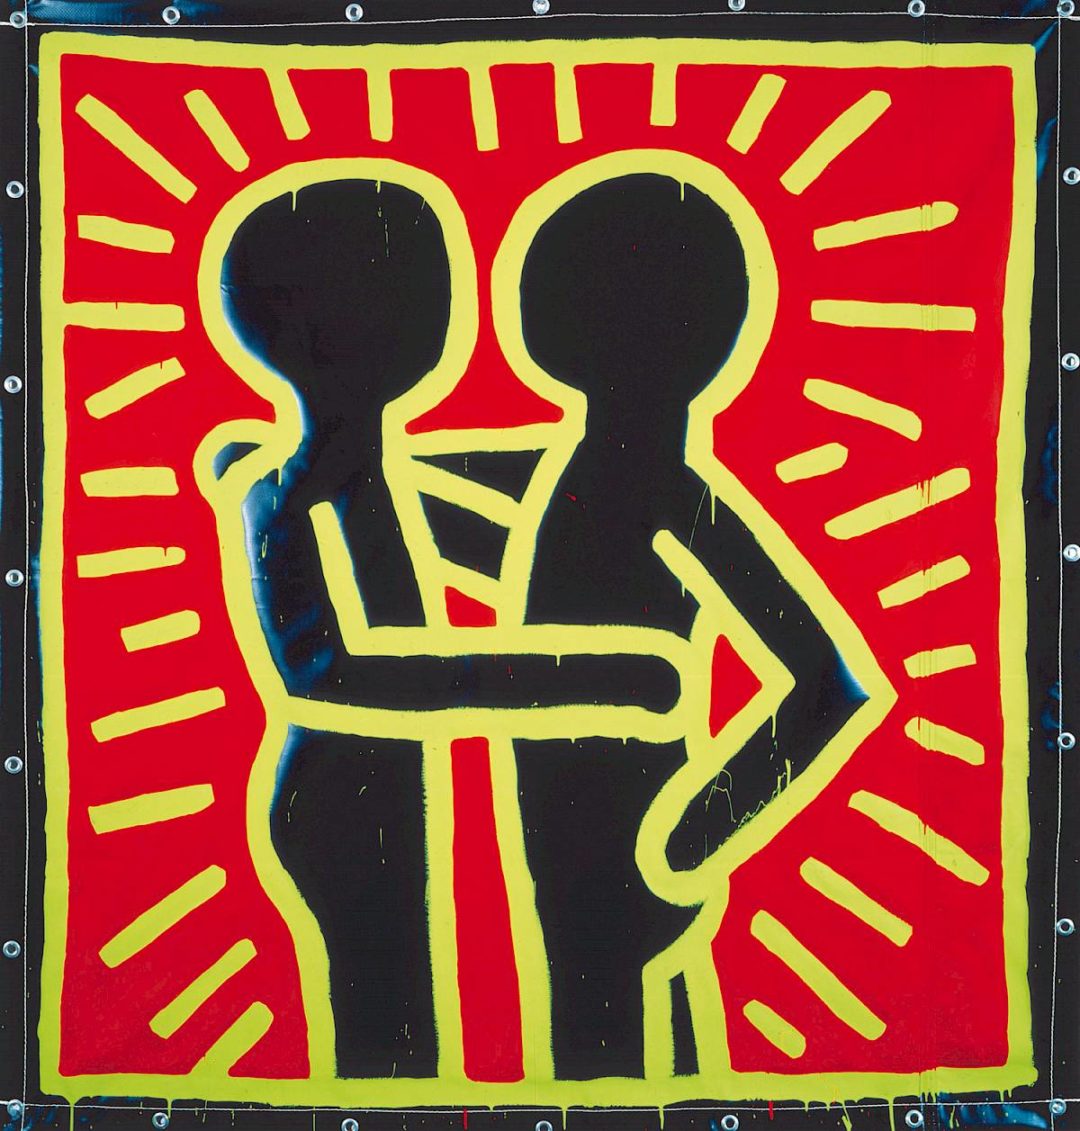 keith_haring_ohne_titel-_september_1982_copyright_c_keith_haring_foundation.1200x0